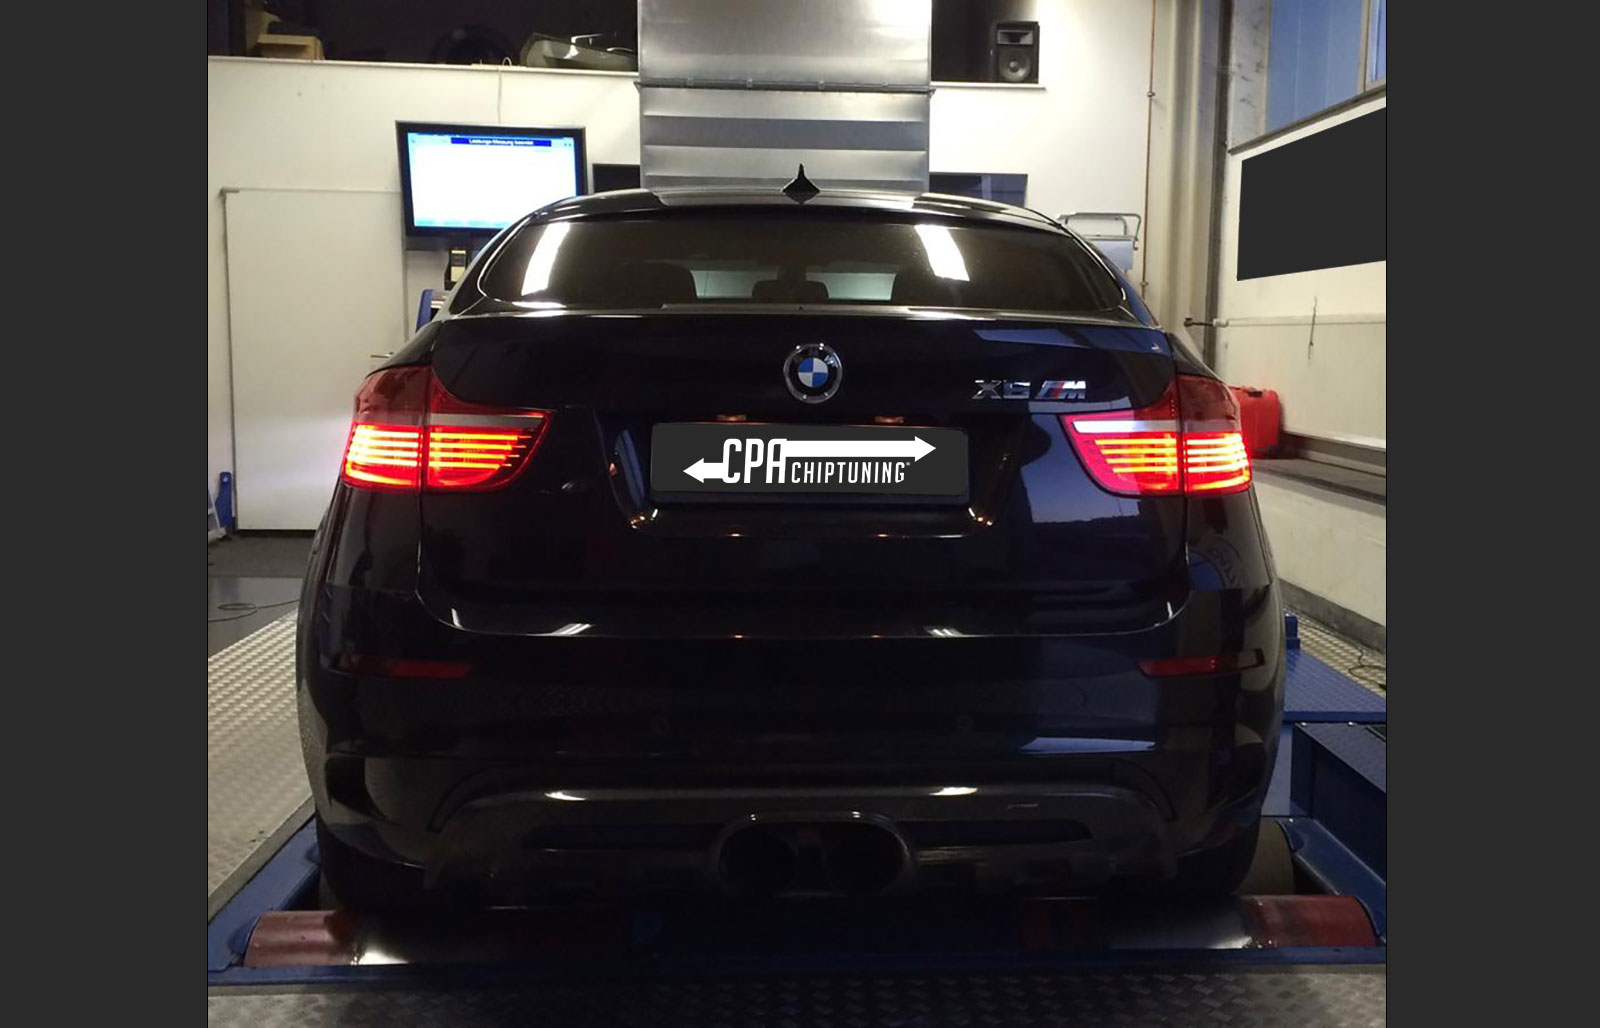 In the test at CPA the BMW X6 M